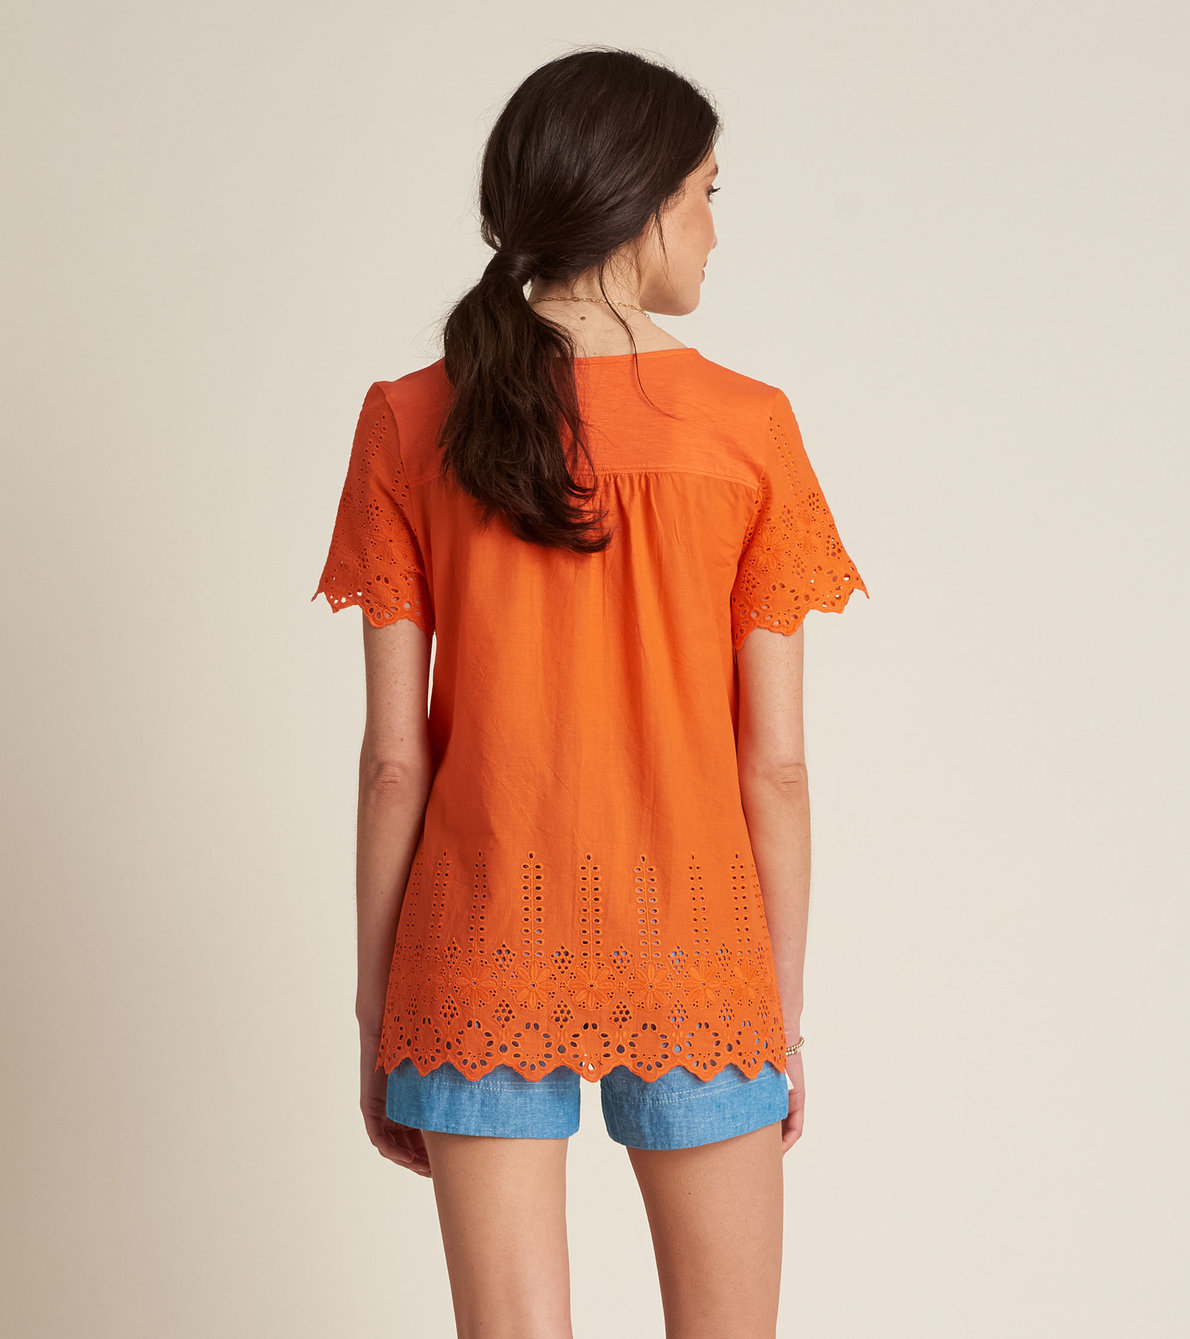 View larger image of Eyelet Tee - Hot Coral